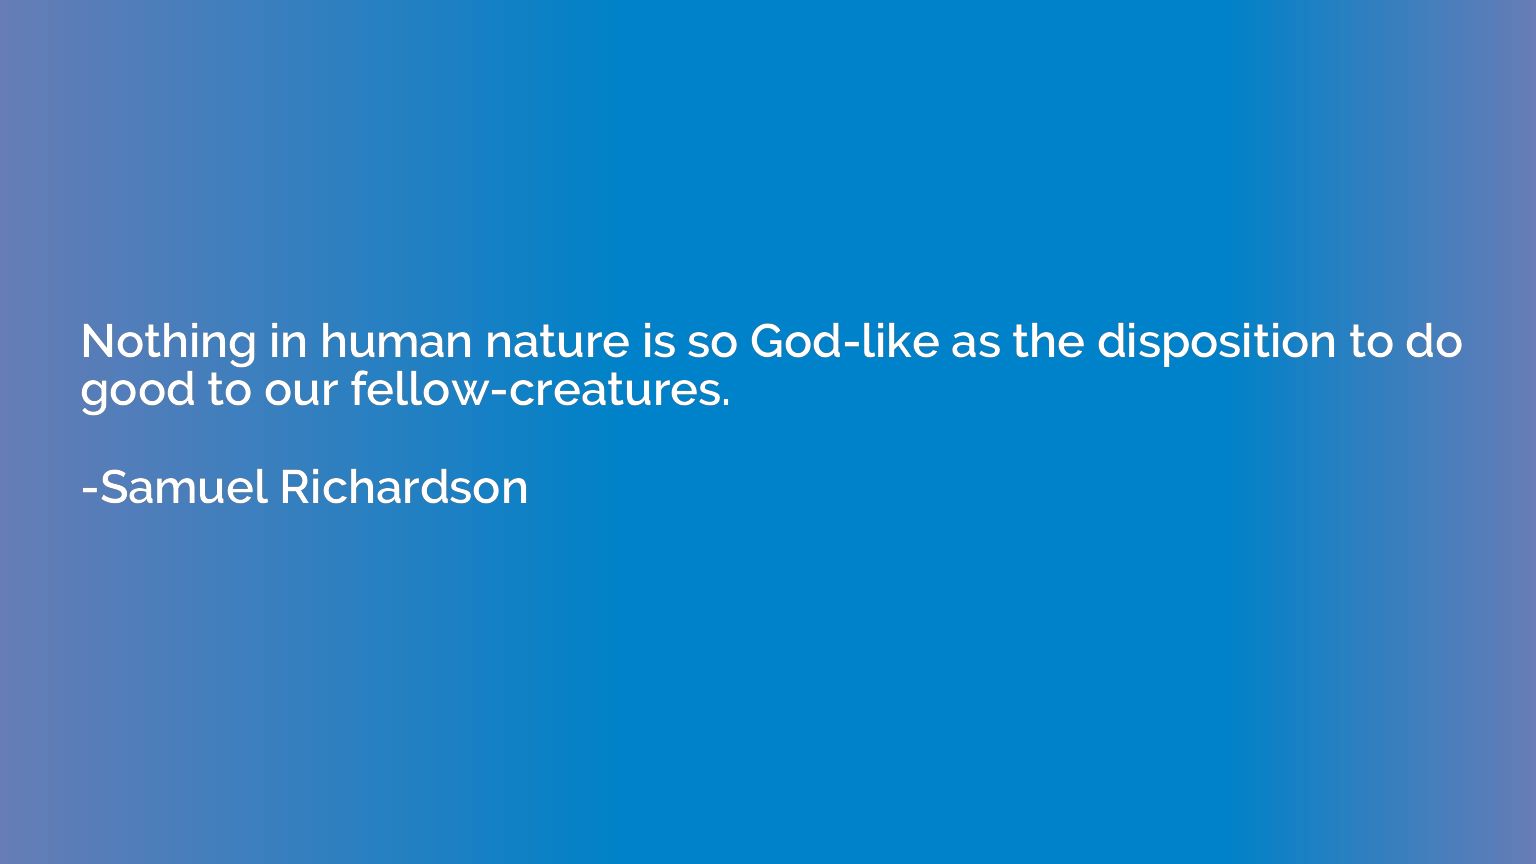 Nothing in human nature is so God-like as the disposition to